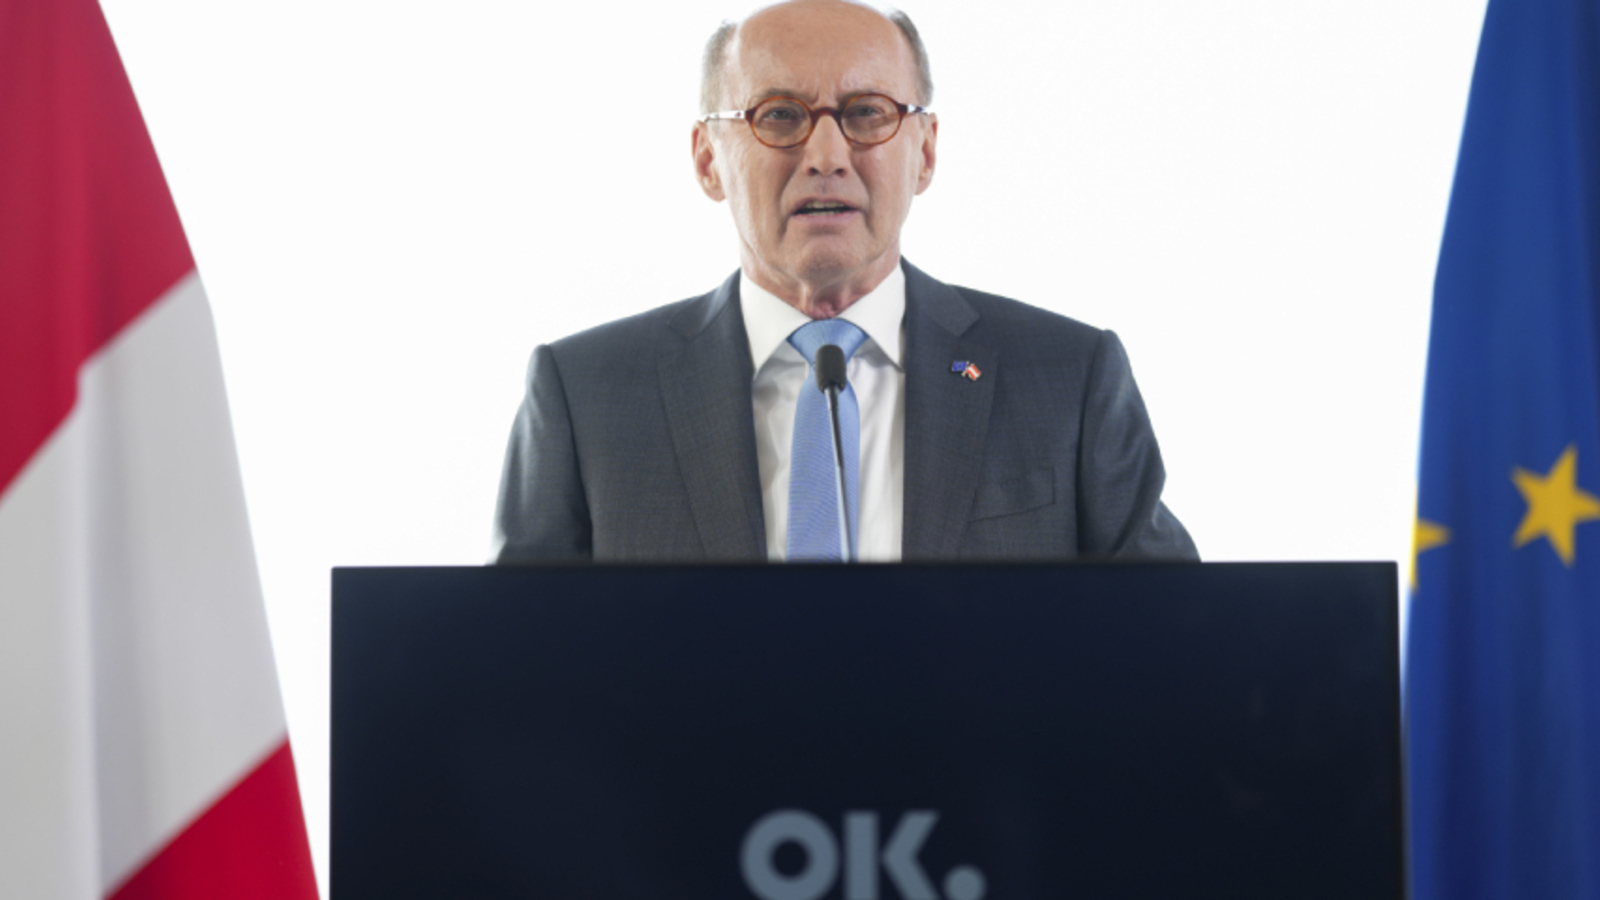 Othmar Karas does not rule out his own list in the National Council election